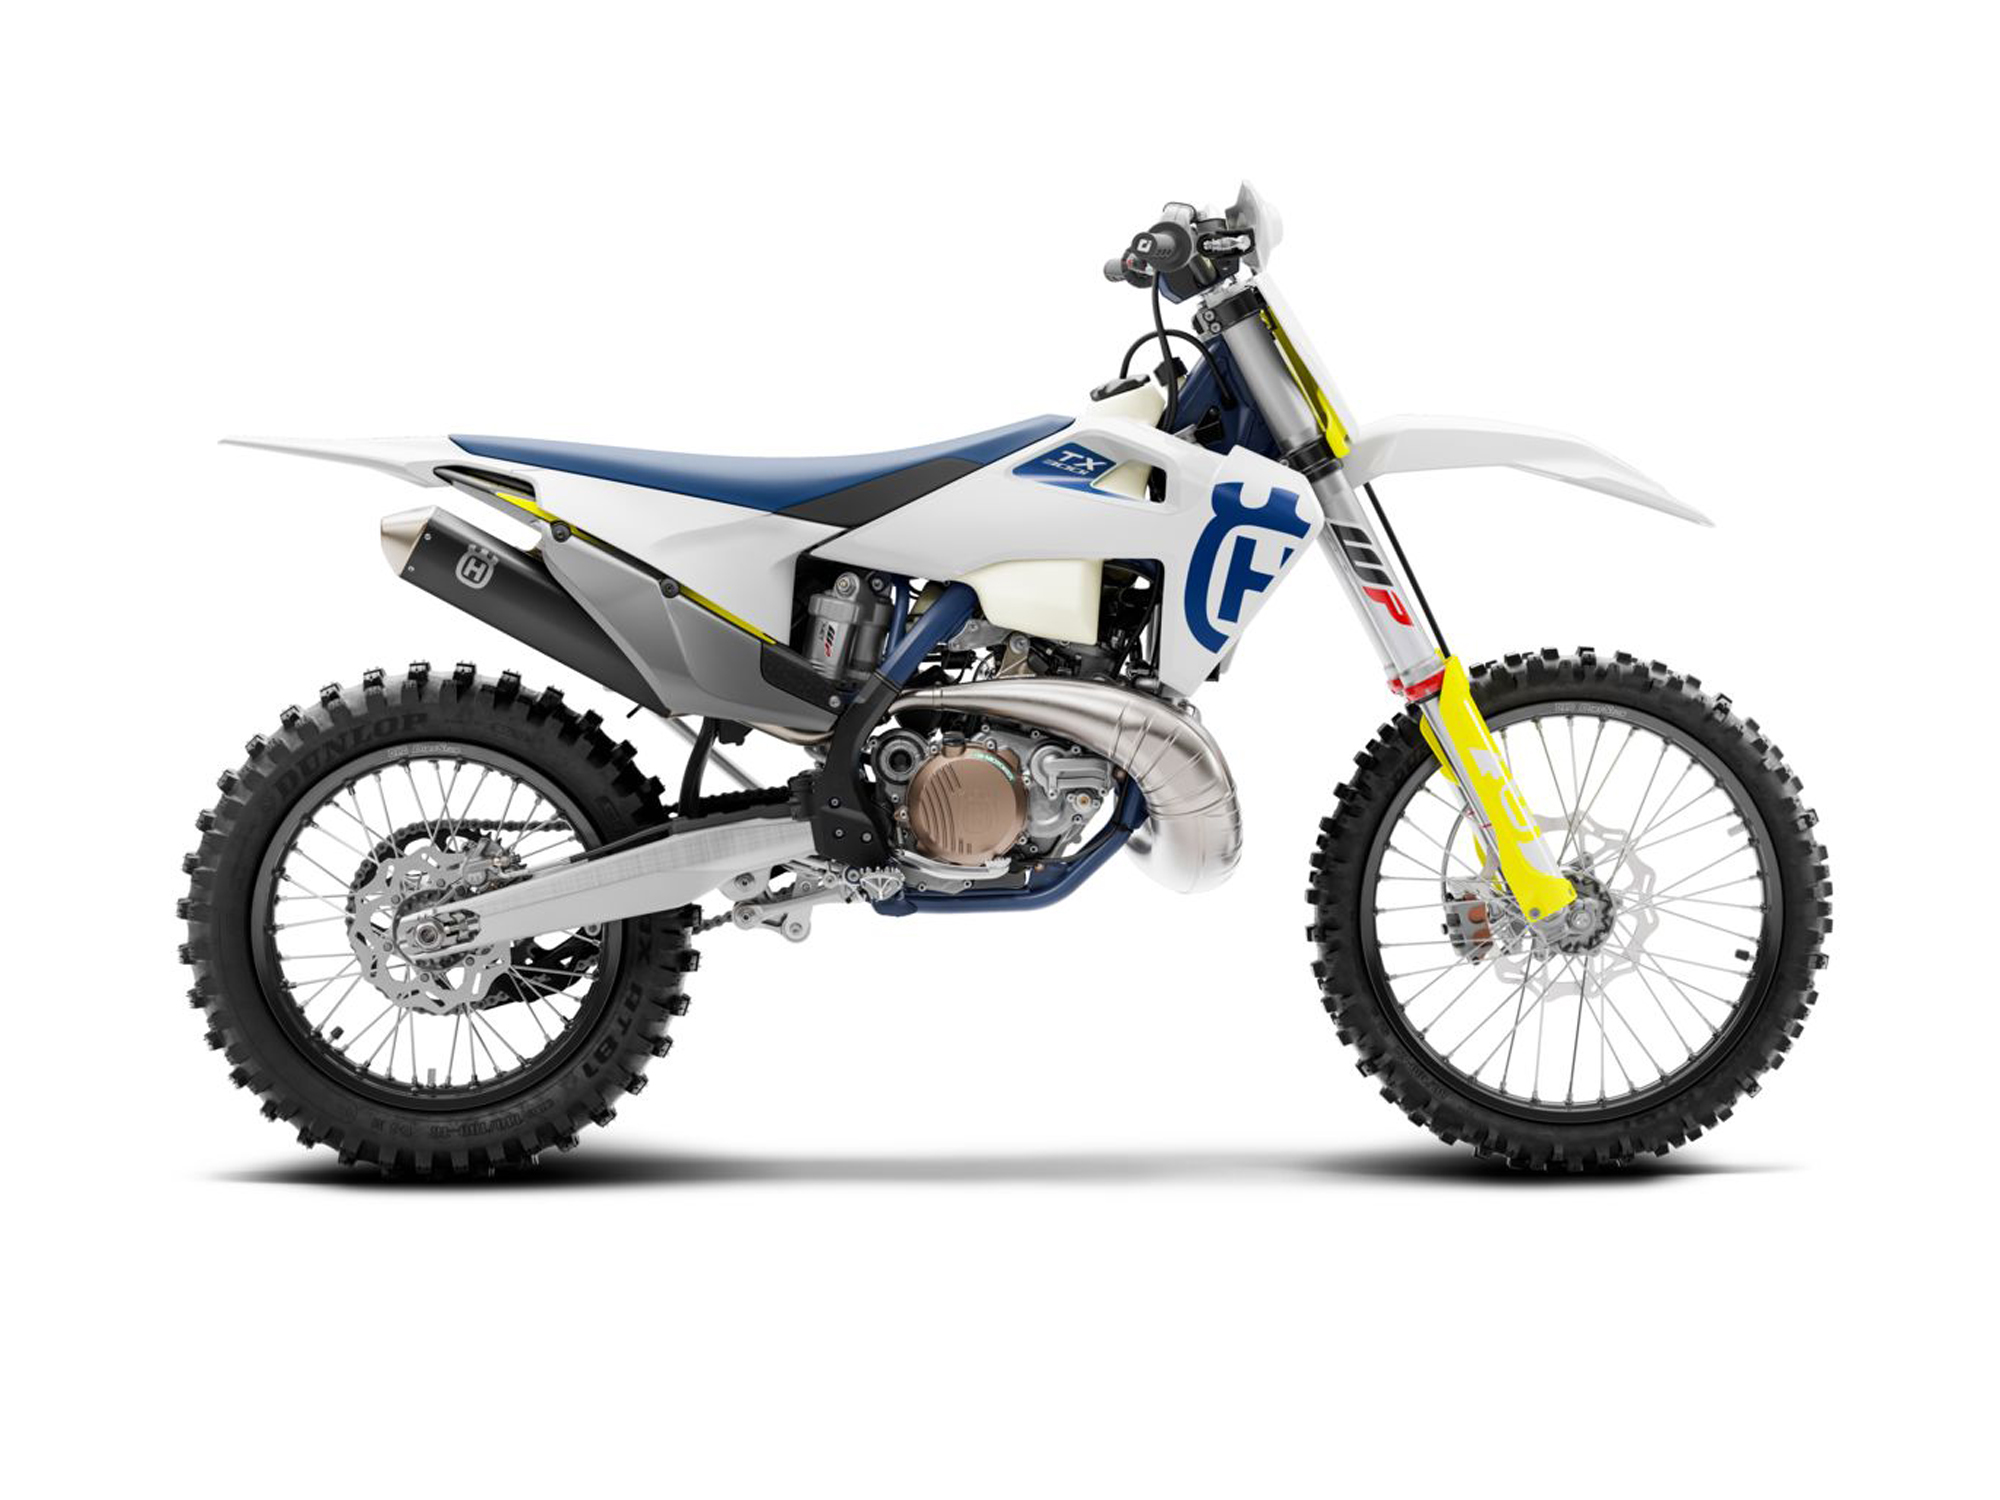 2020 300cc Off-Road Two-Stroke Dirt Bikes To Buy | Dirt Rider